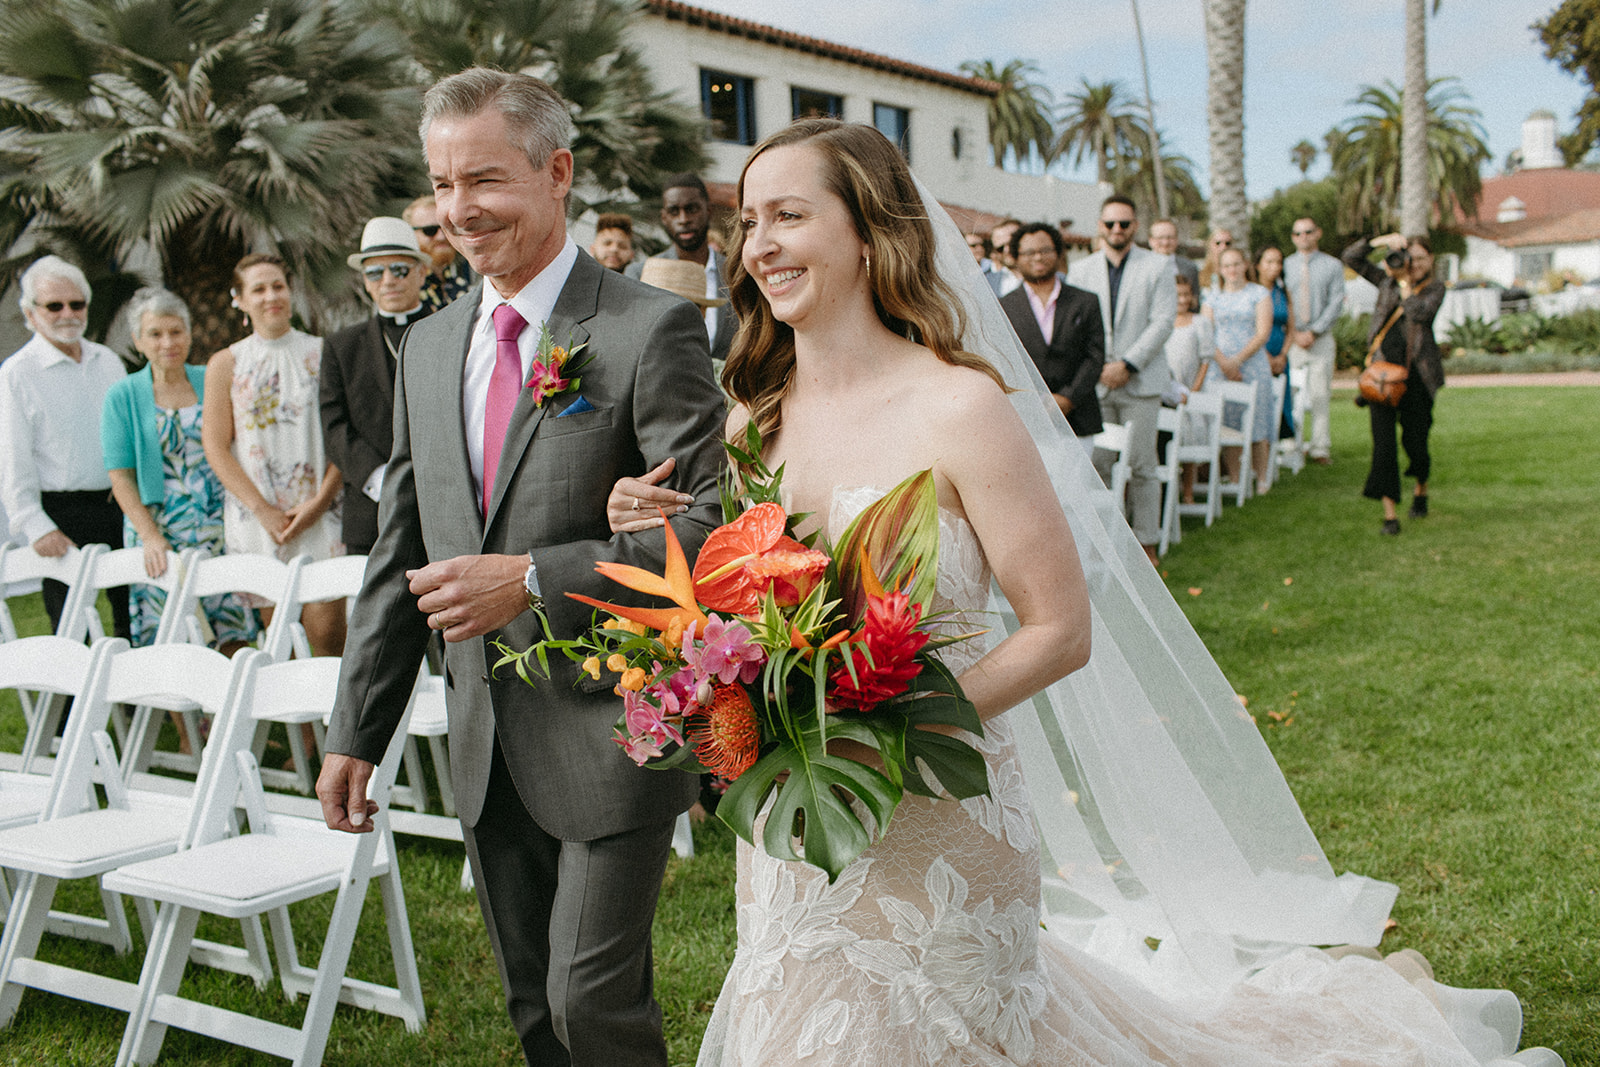 bride in strapless champagne dress with lace overlay walks down aisle with father of the bride in grey suit and bright pink tie